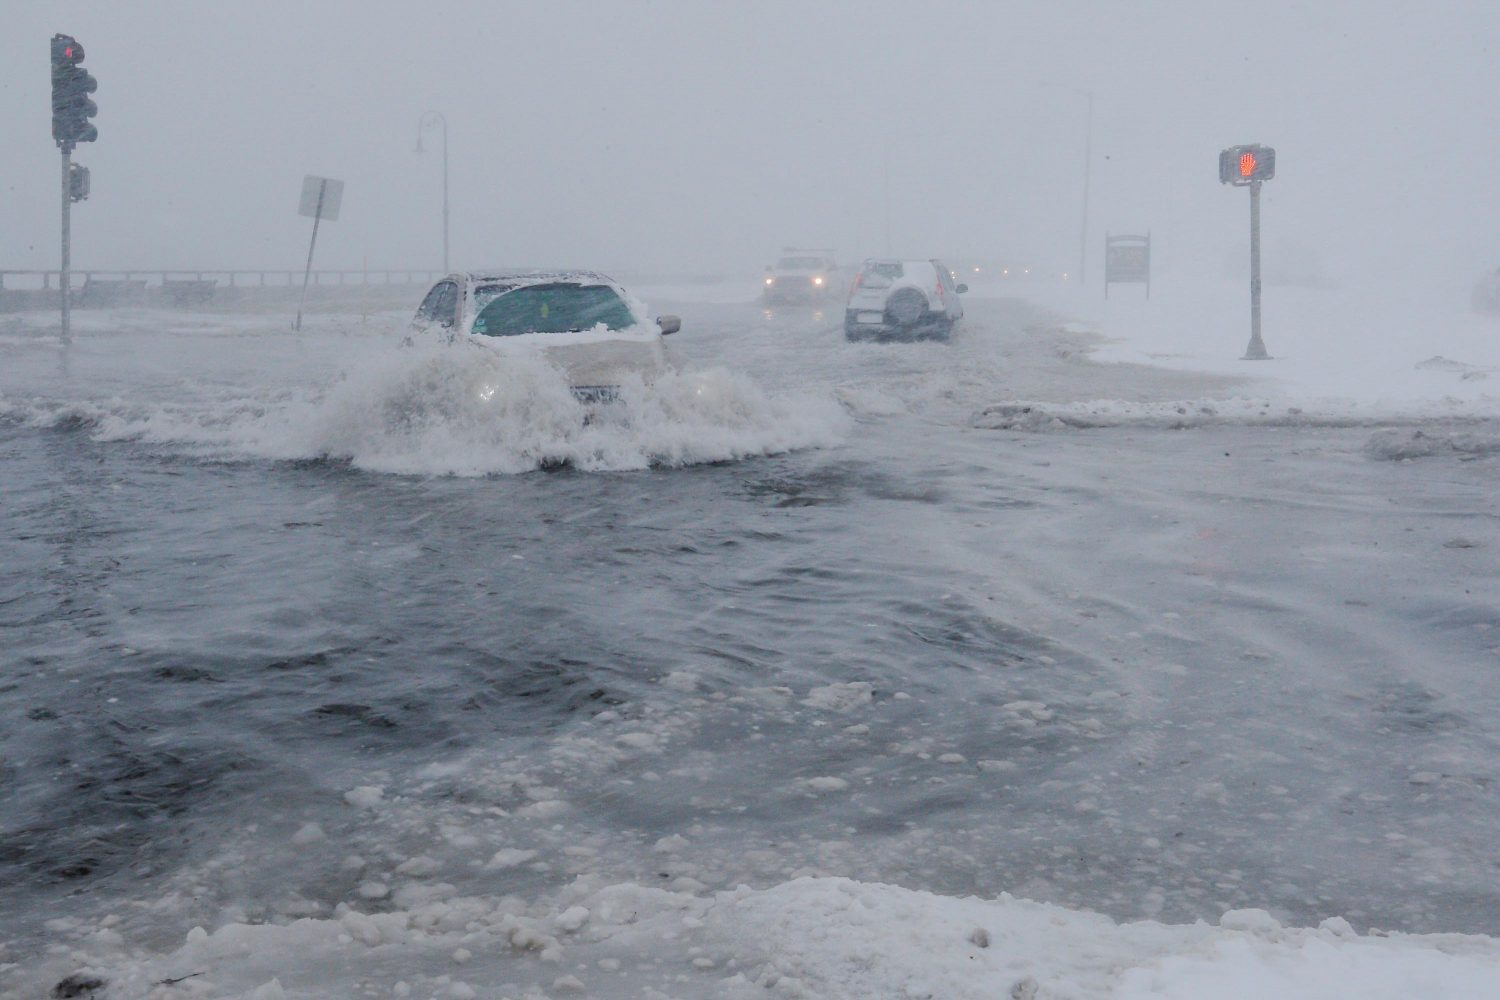 Drivers make their way along the flooded Beach Road after the ocean overtopped the seawall in the Boston suburb of Lynn
Drivers make their way along the flooded Beach Road after the ocean overtopped the seawall during a winter snowstorm in the Boston suburb of Lynn, Massachusetts, U.S., January 4, 2018. REUTERS/Brian Snyder